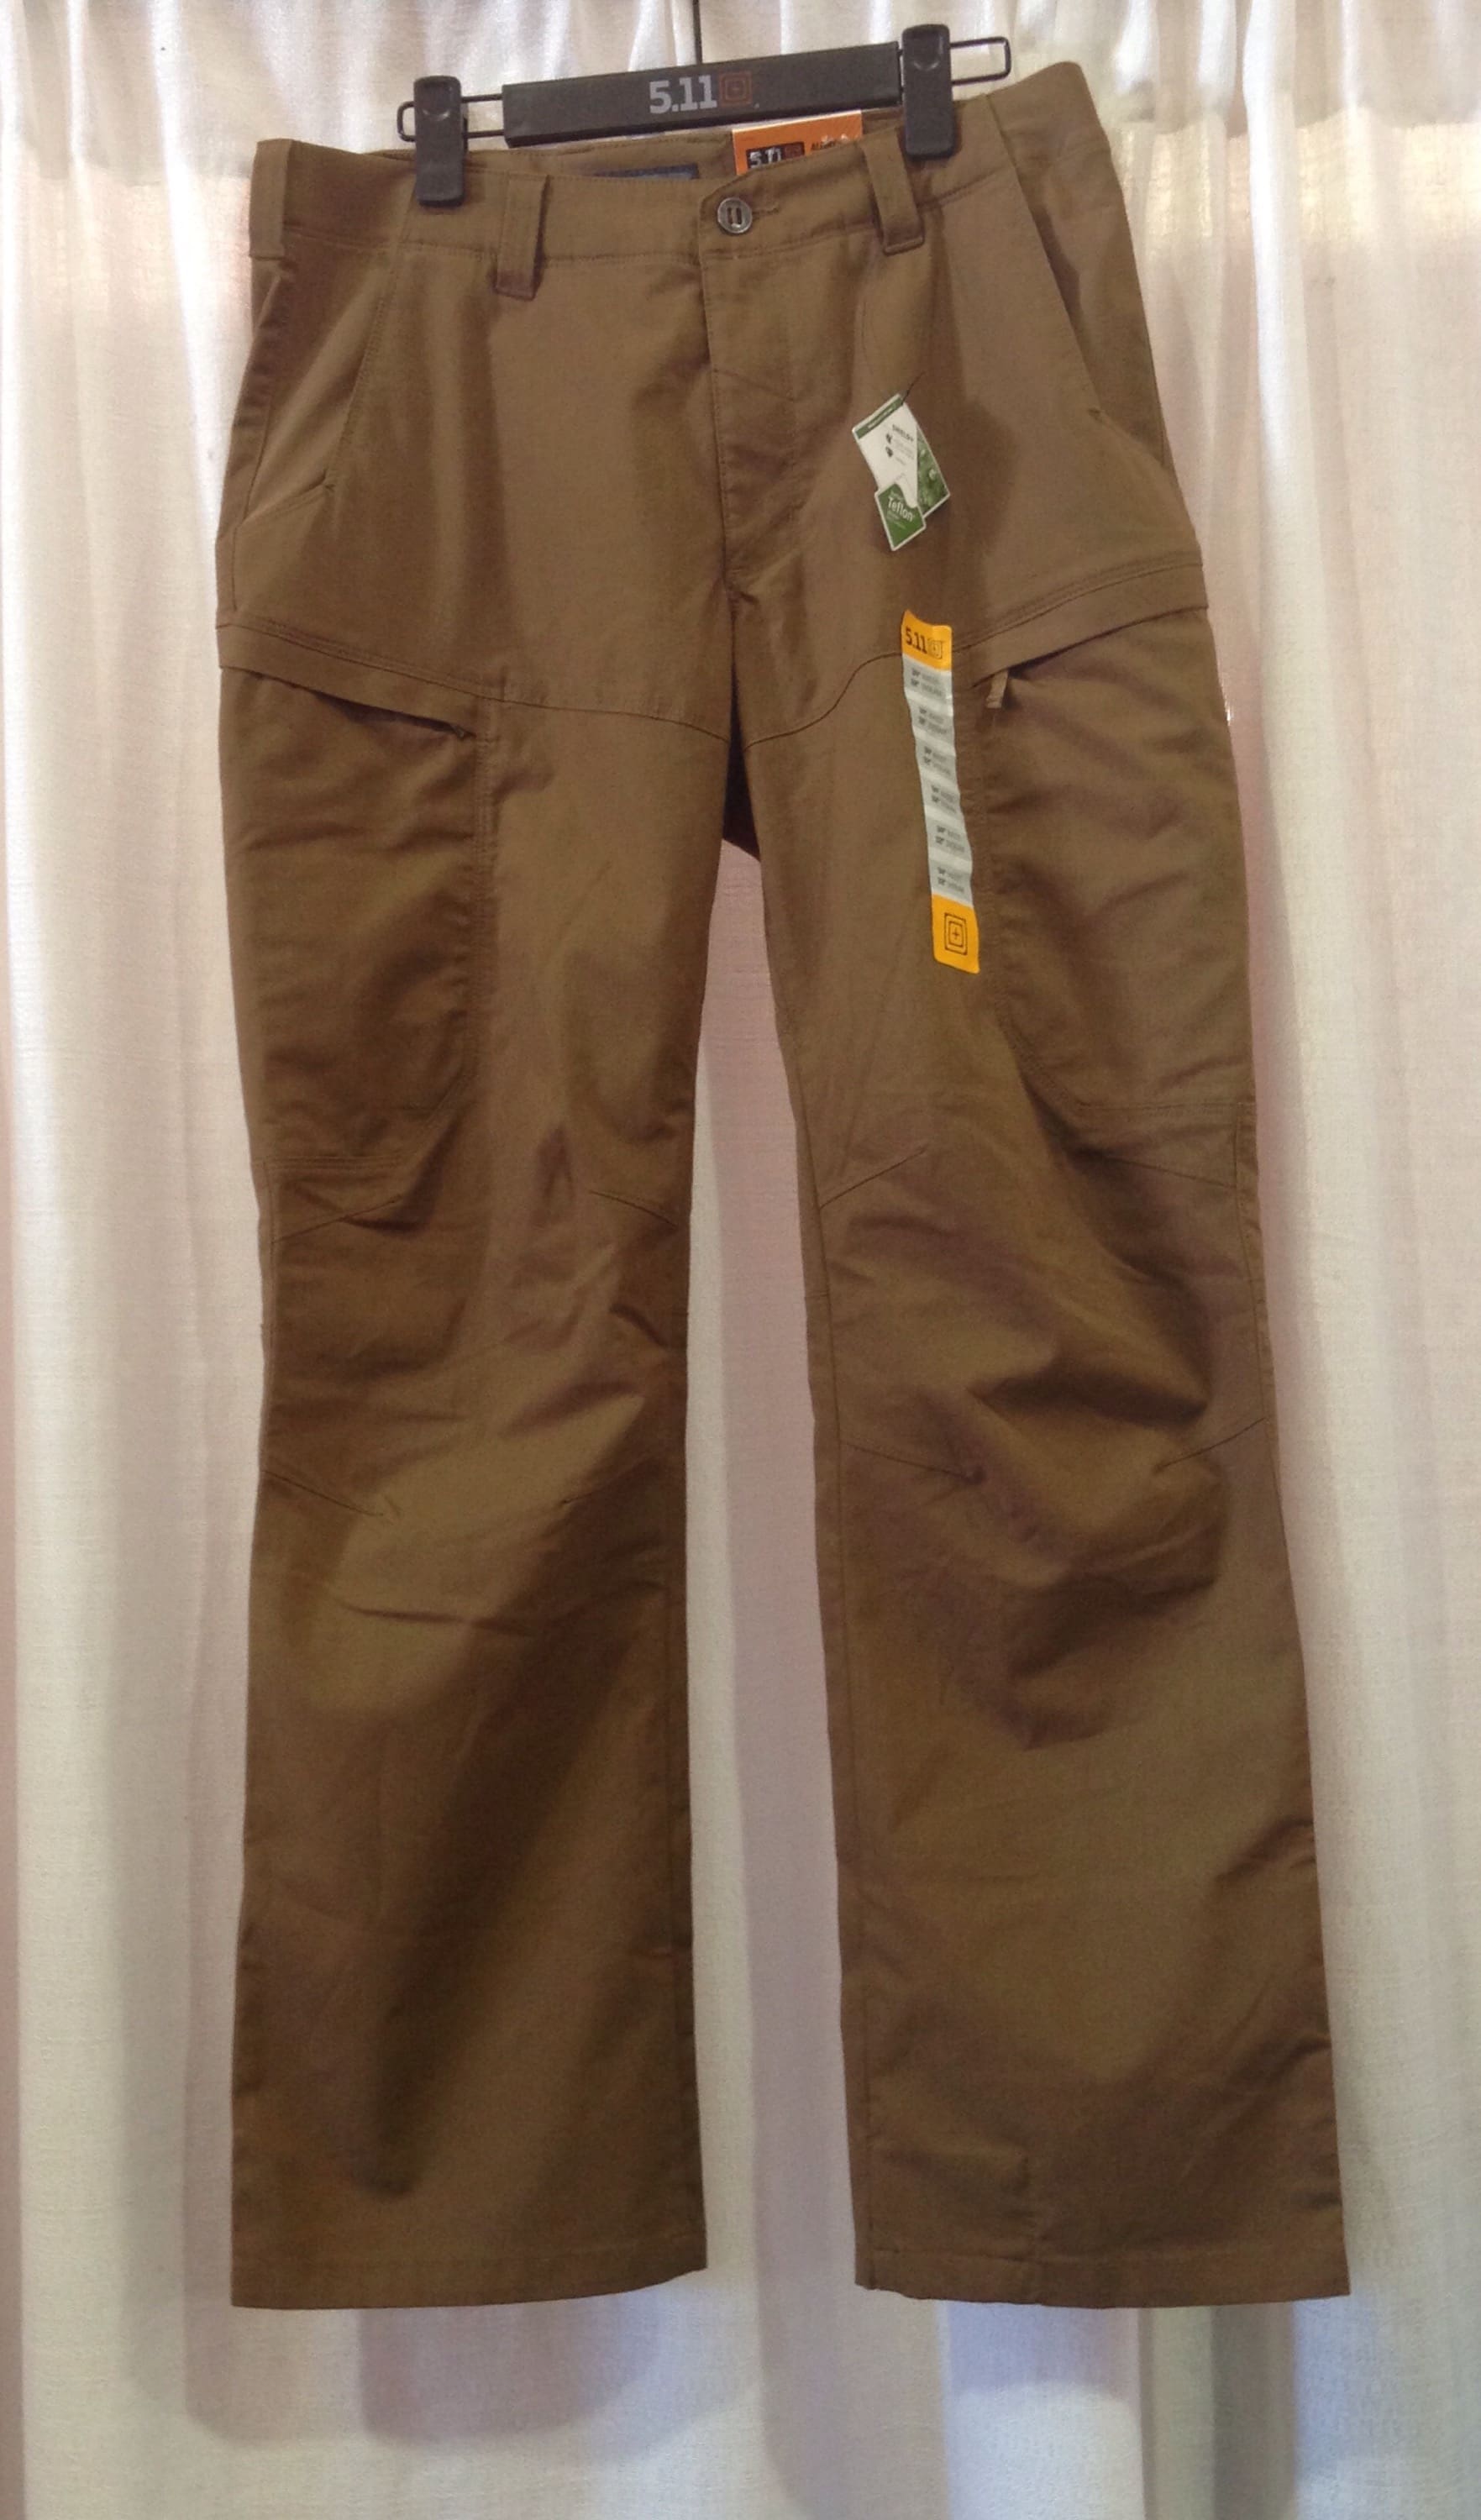 MDM - 5.11 Tactical - Apex Pant - Soldier Systems Daily